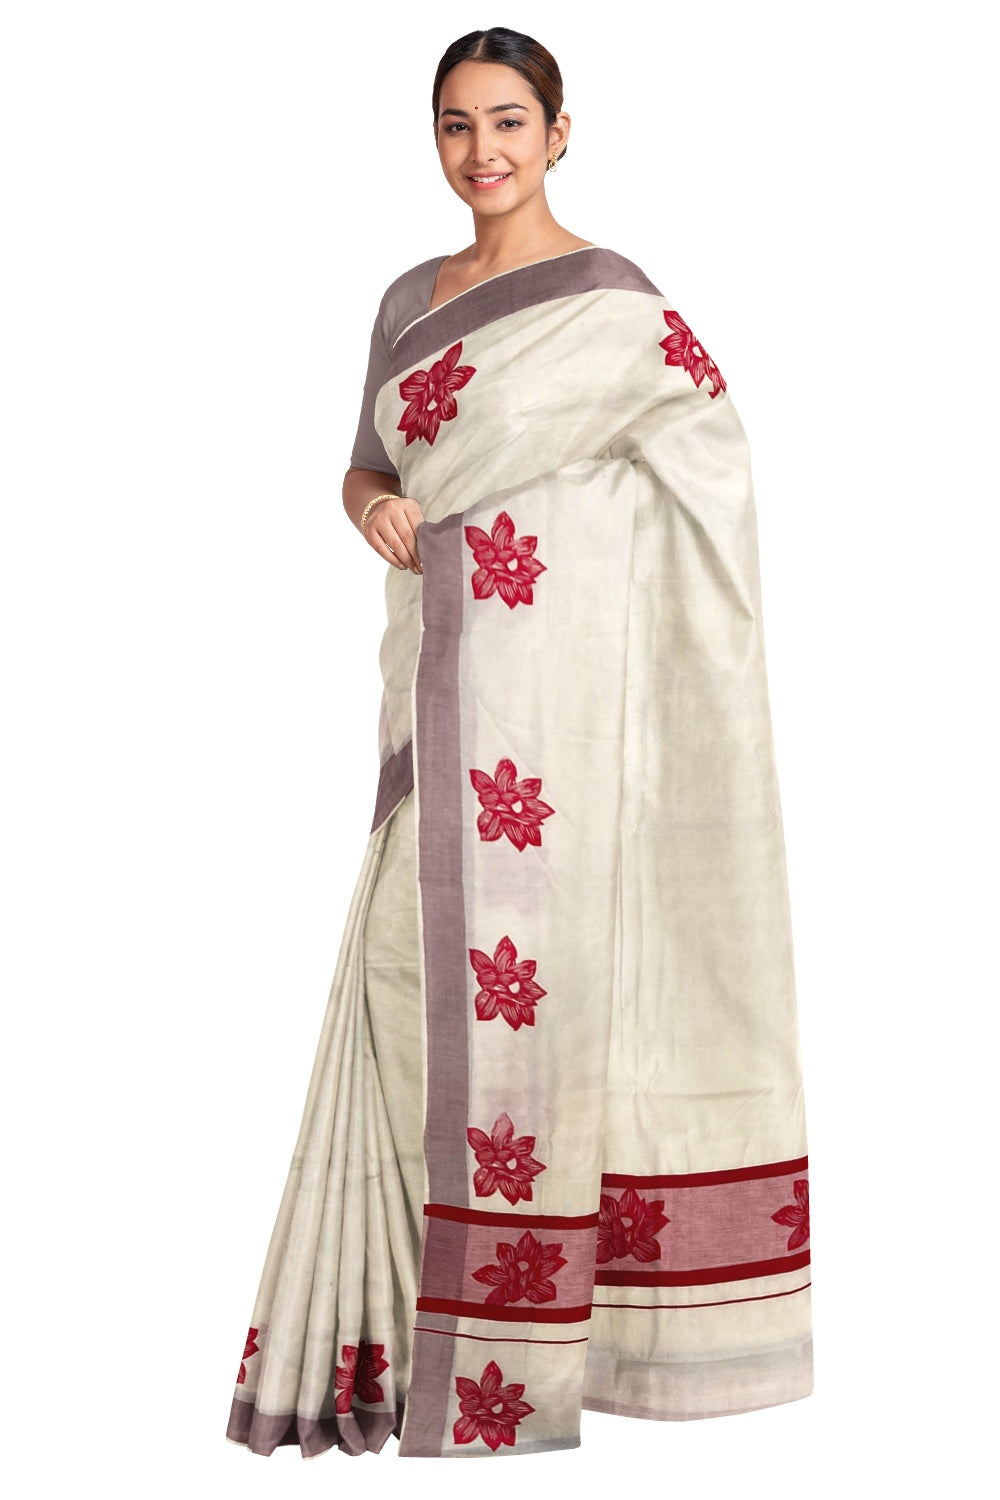 Pure Cotton Kerala Saree with Red Floral Block Printed Design